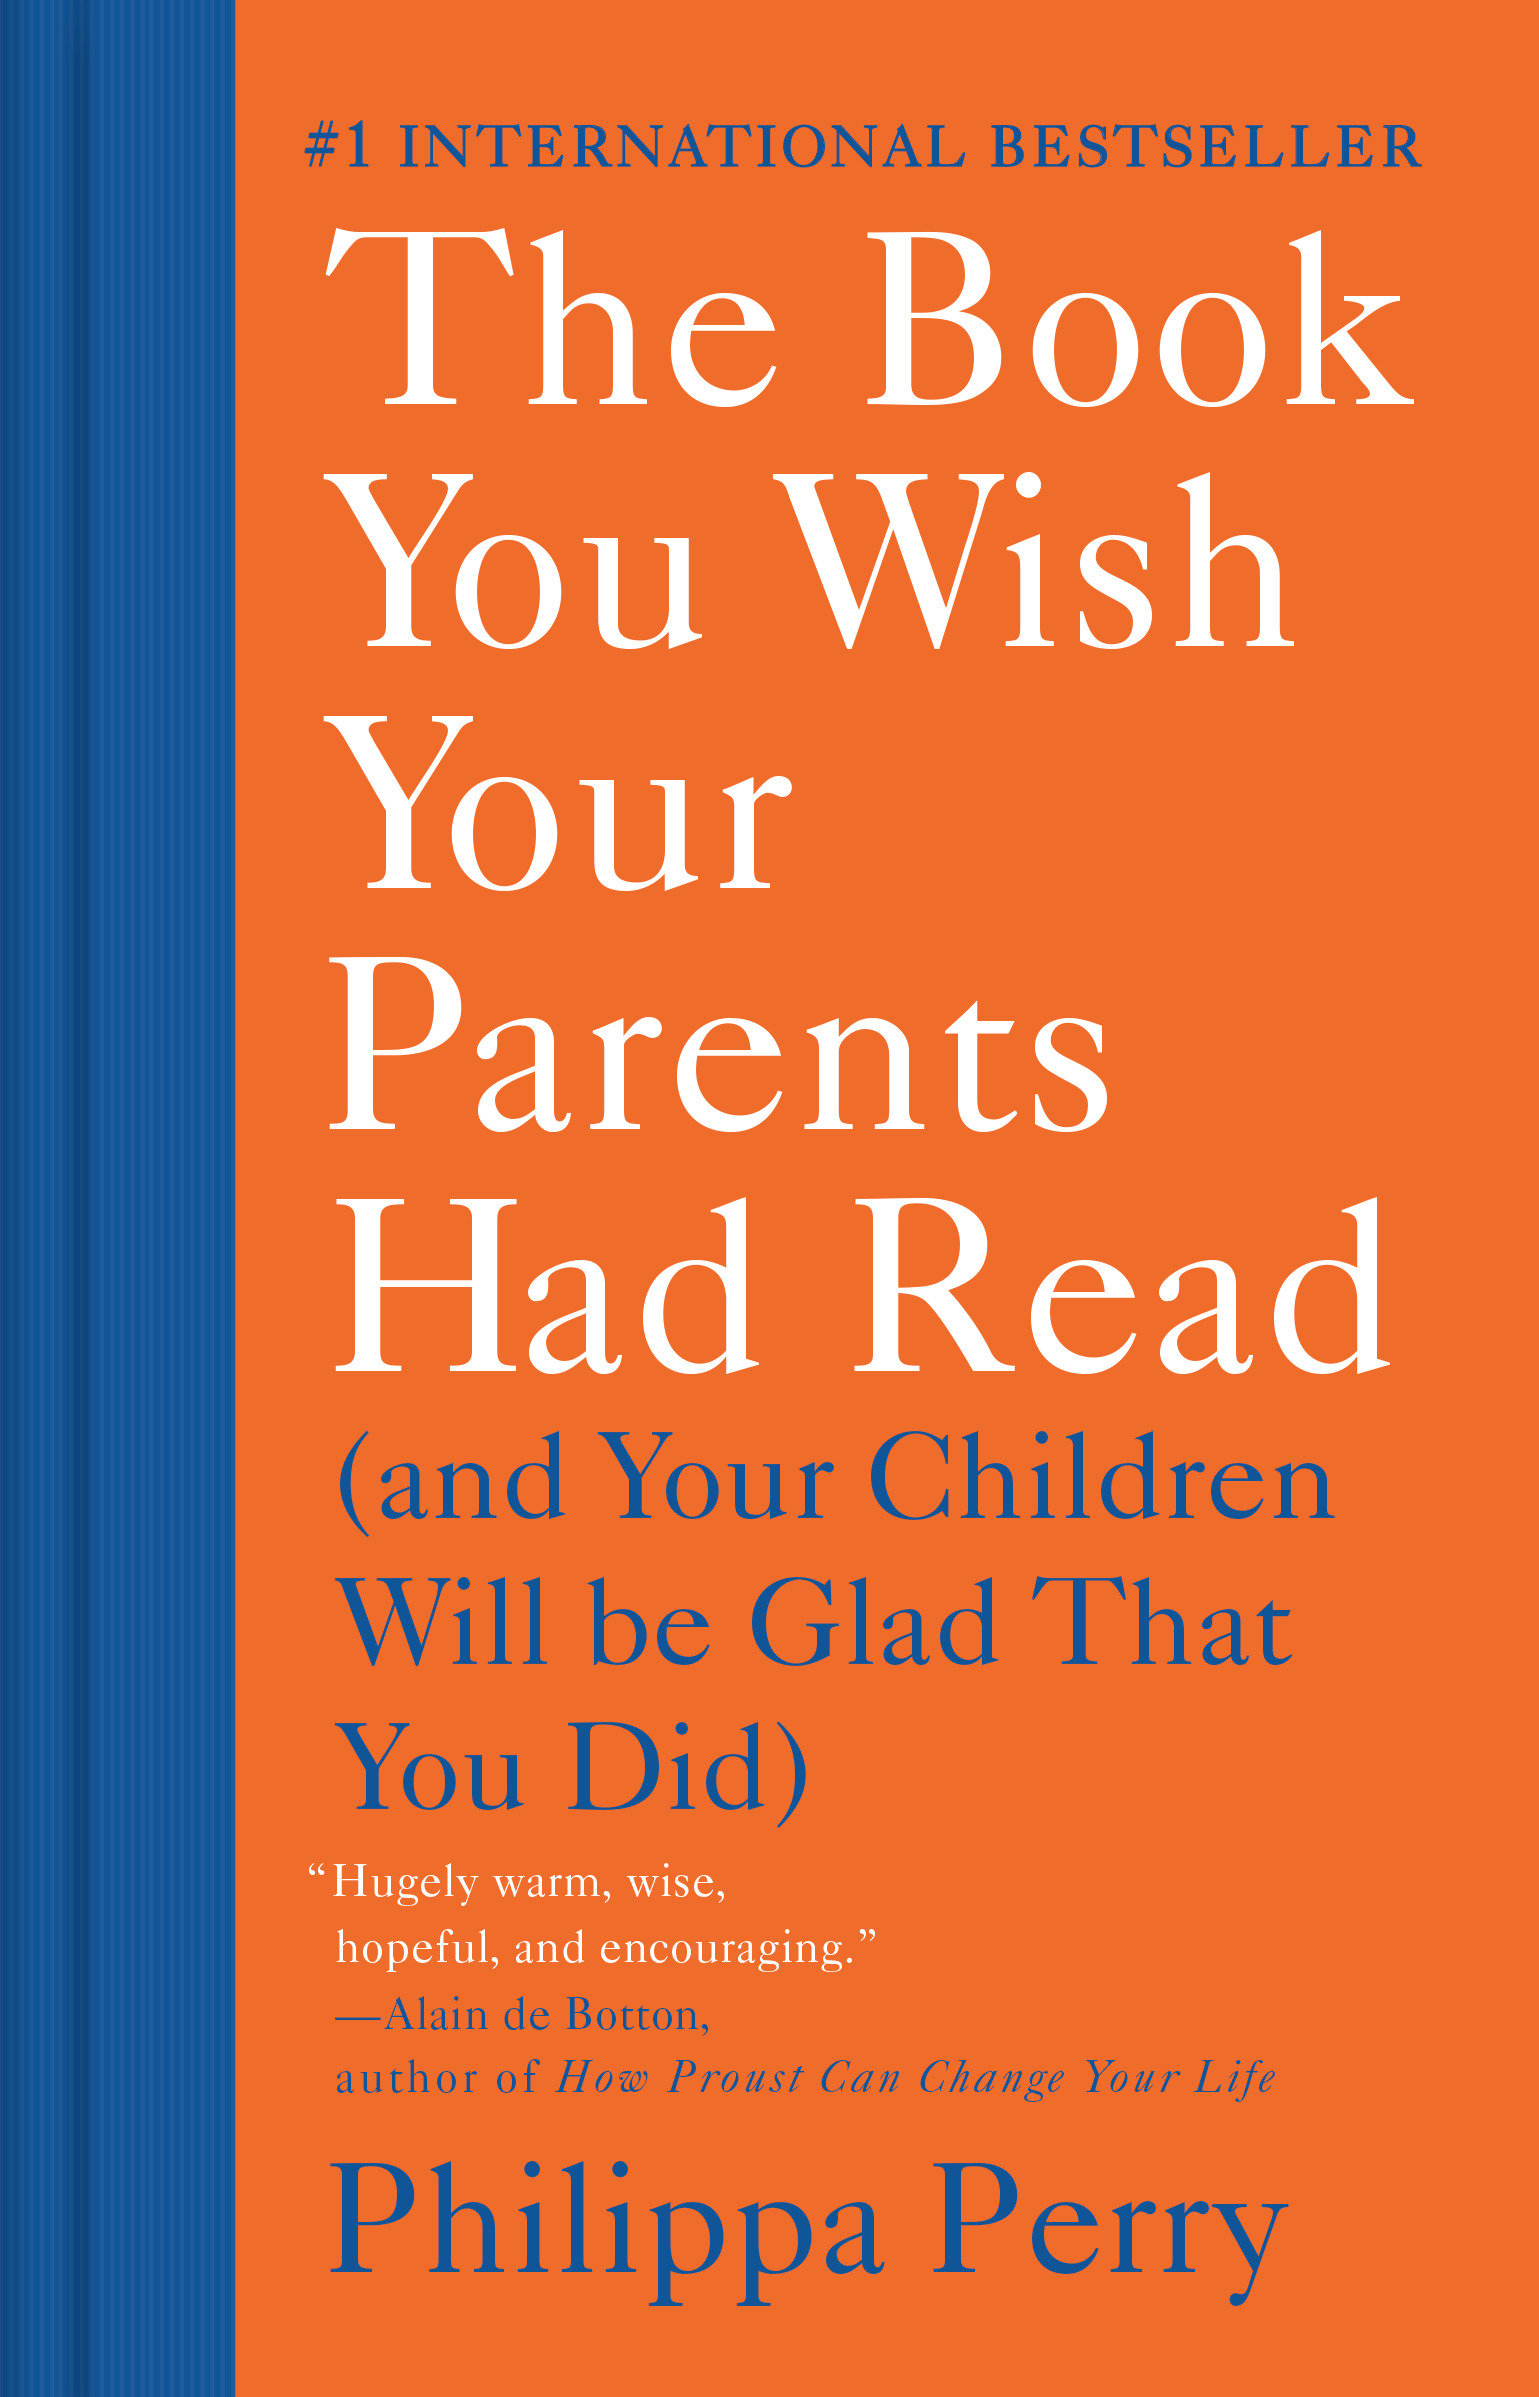 The Book You Wish Your Parents Had Read (Hardcover Book)